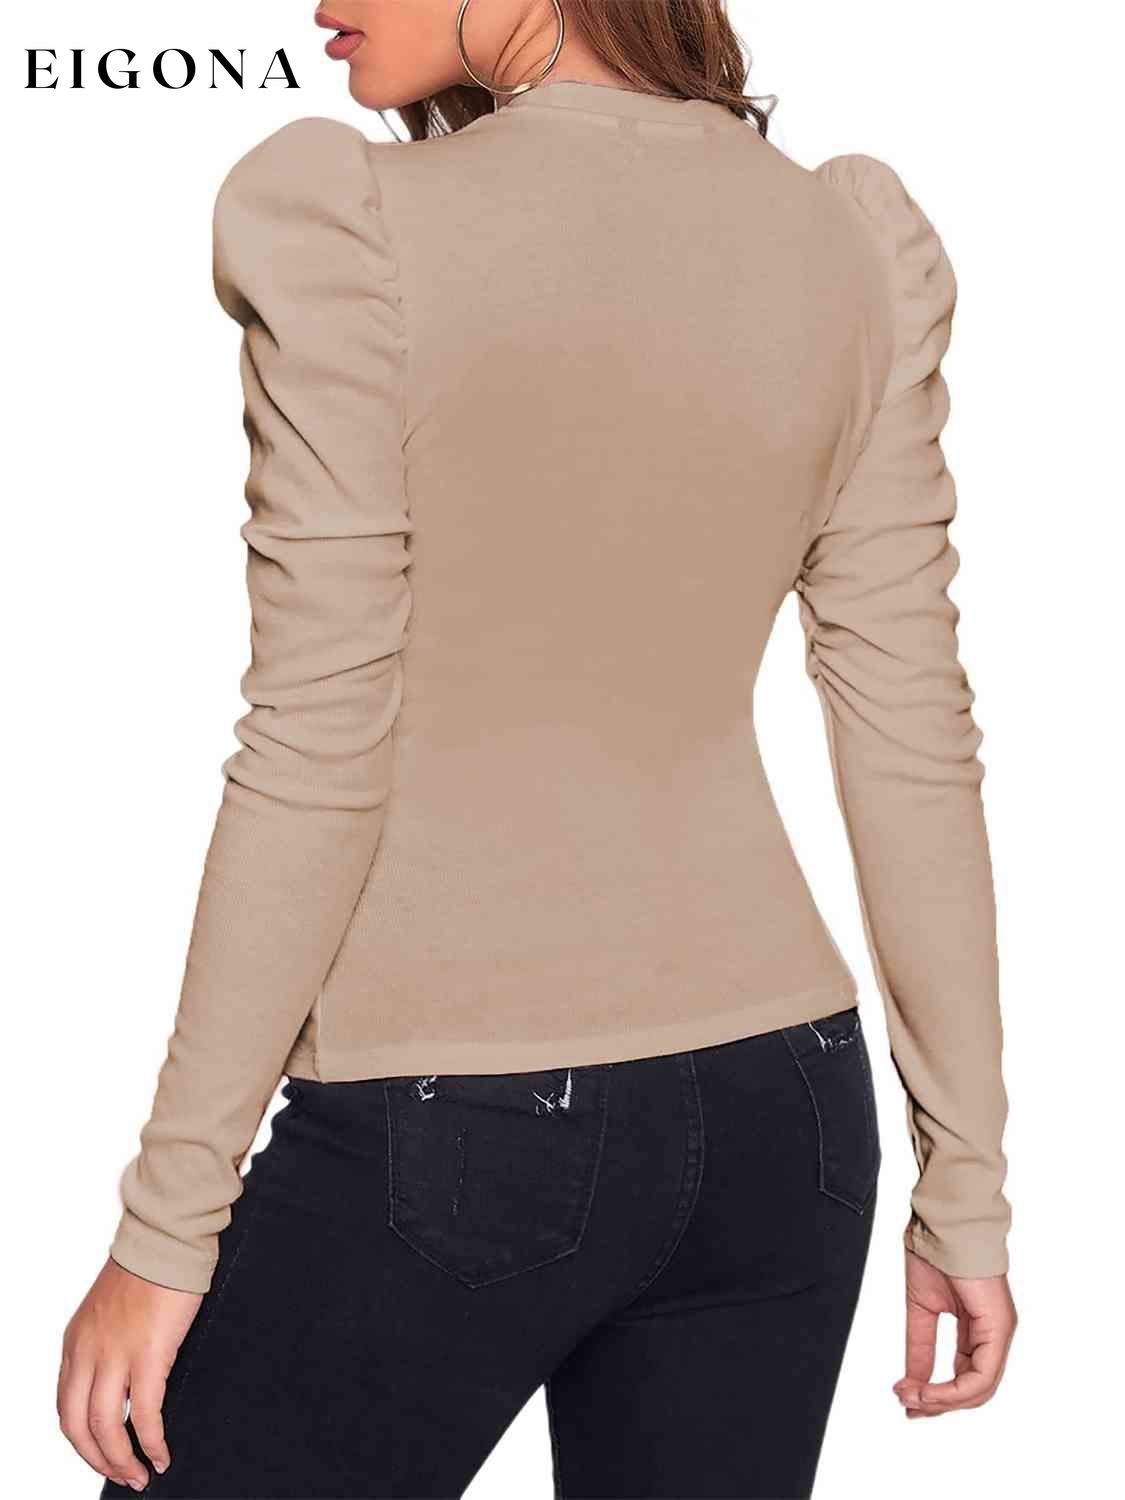 Round Neck Leg-Of-Mutton Sleeve Top A.L.D. clothes long sleeve shirt long sleeve shirts long sleeve top long sleeve tops Ship From Overseas shirt shirts top tops